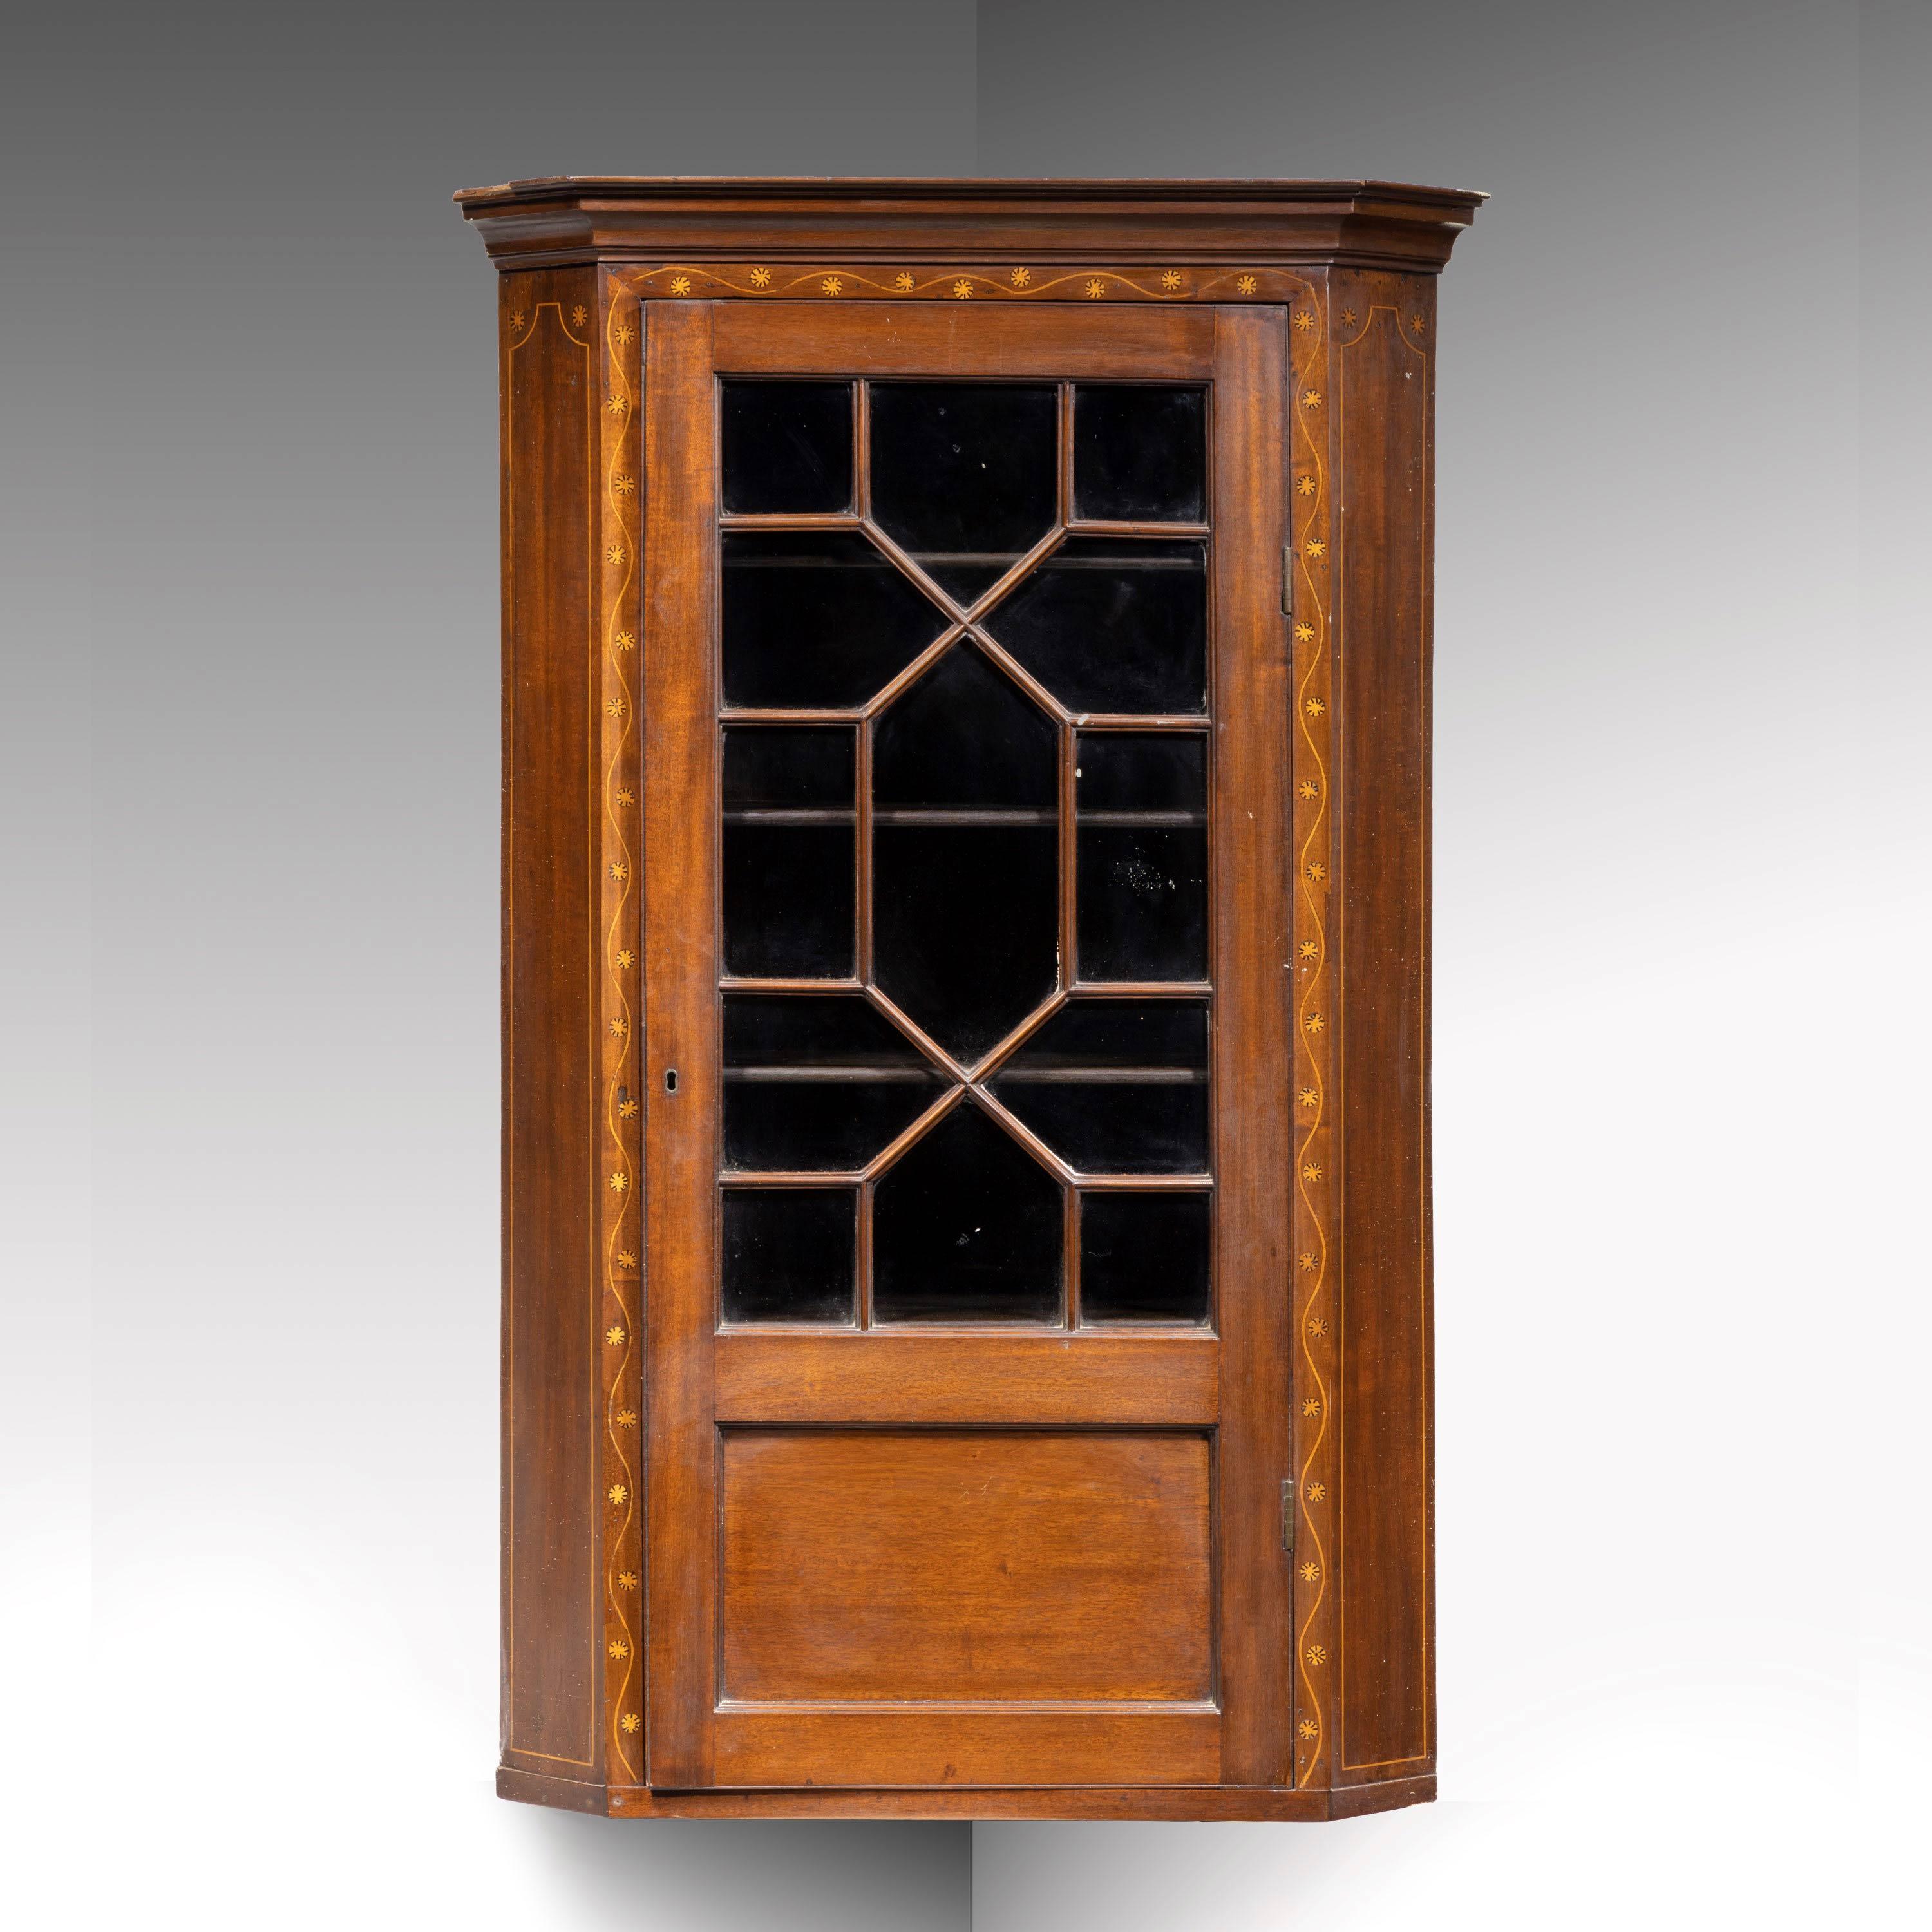 A most attractive George III mahogany corner cupboard. Stamped Muirhead Moffat and Company, Glasgow. With two-thirds astral glazed doors and complex banding and edging to the outer edges. 

Muirhead Moffat were Glasgow's best known antiques dealer